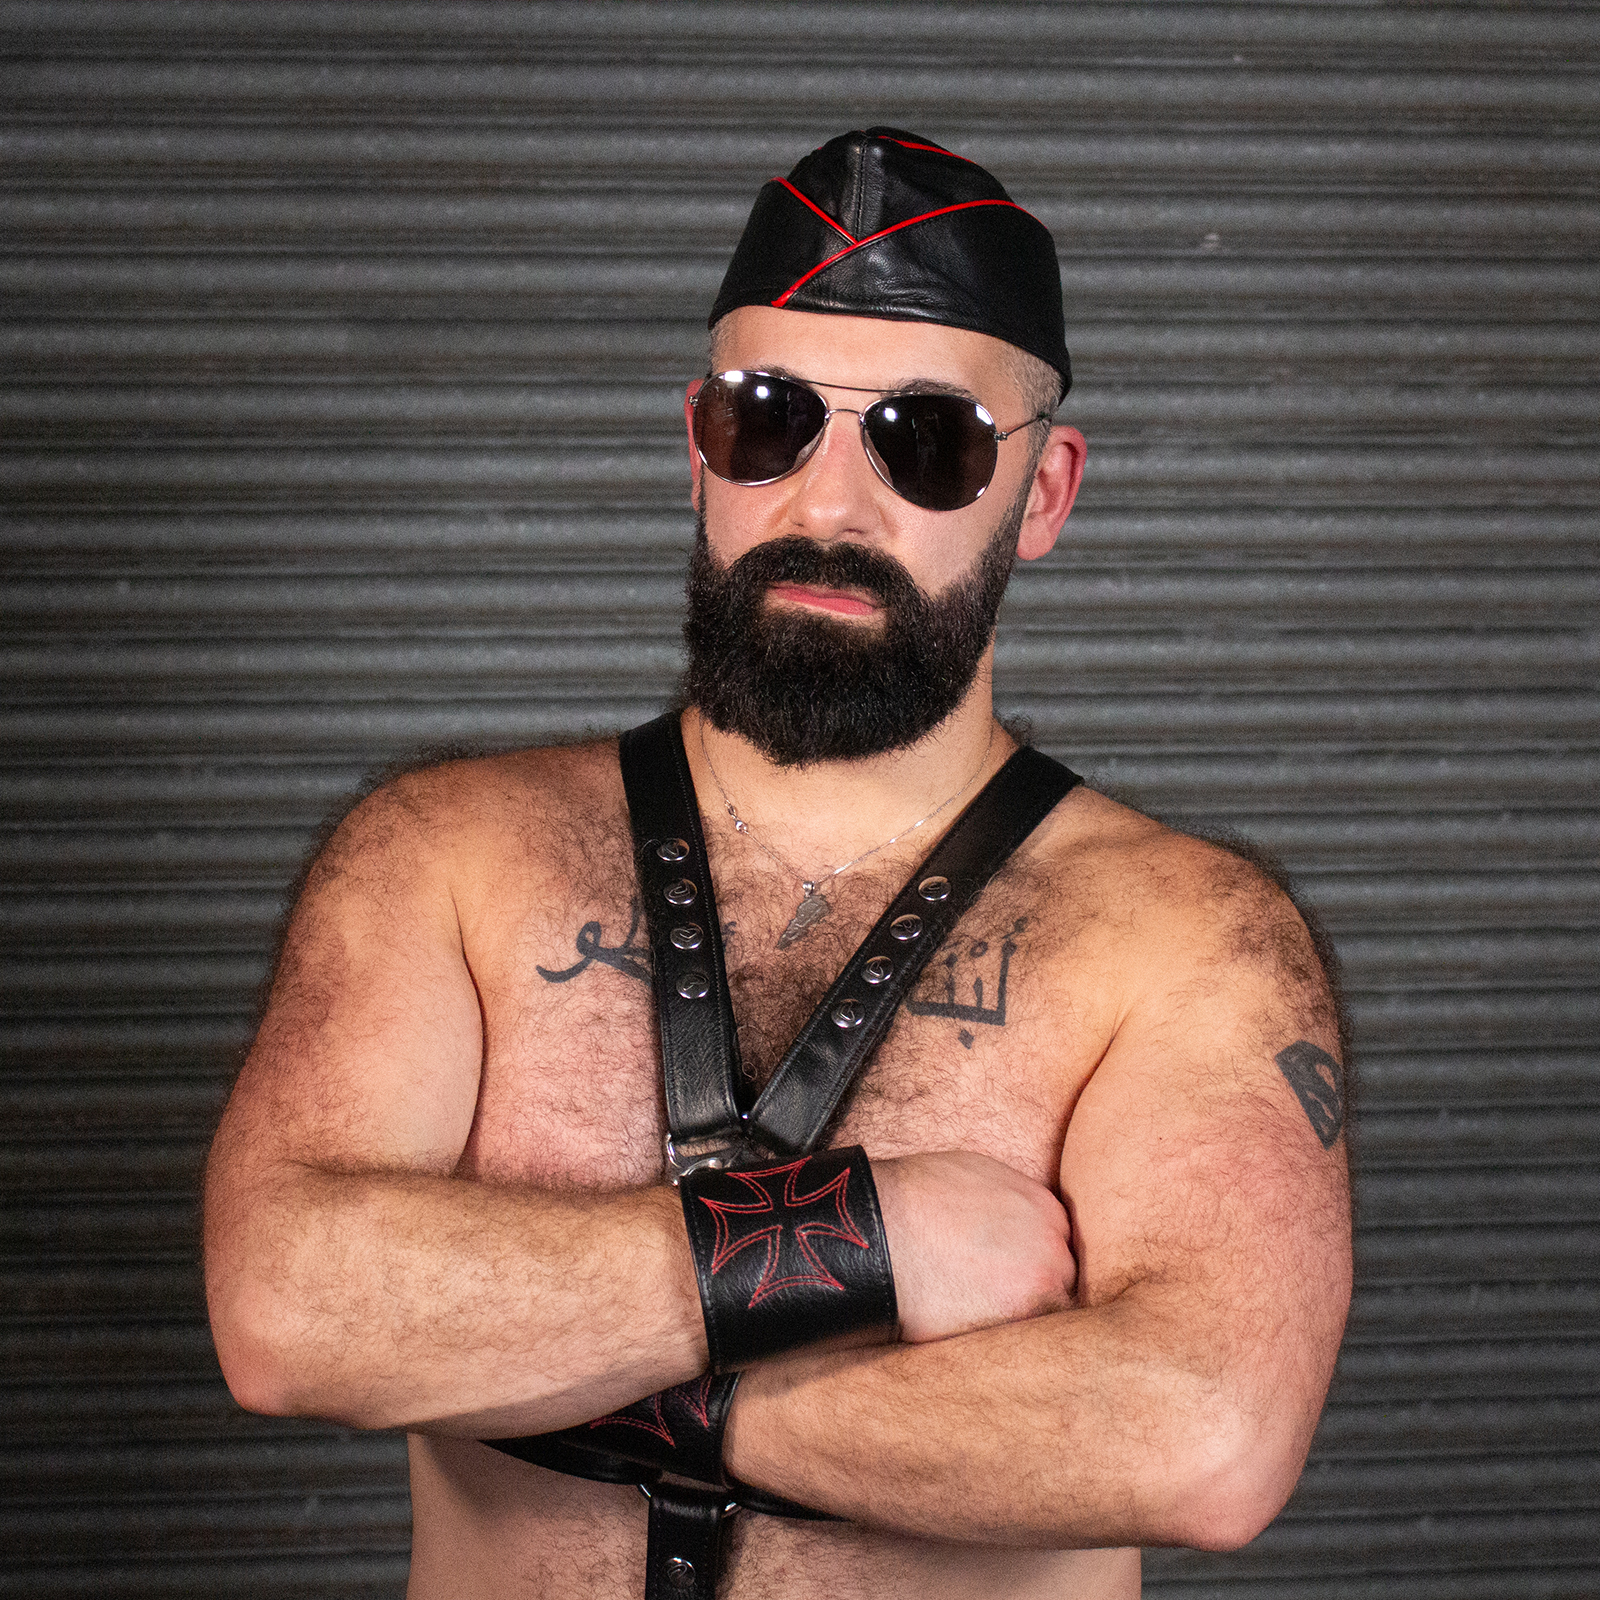 A sexy hairy man is wearing accessories including a garrison cap, a harness, leather wristbands, and aviator sunglasses.